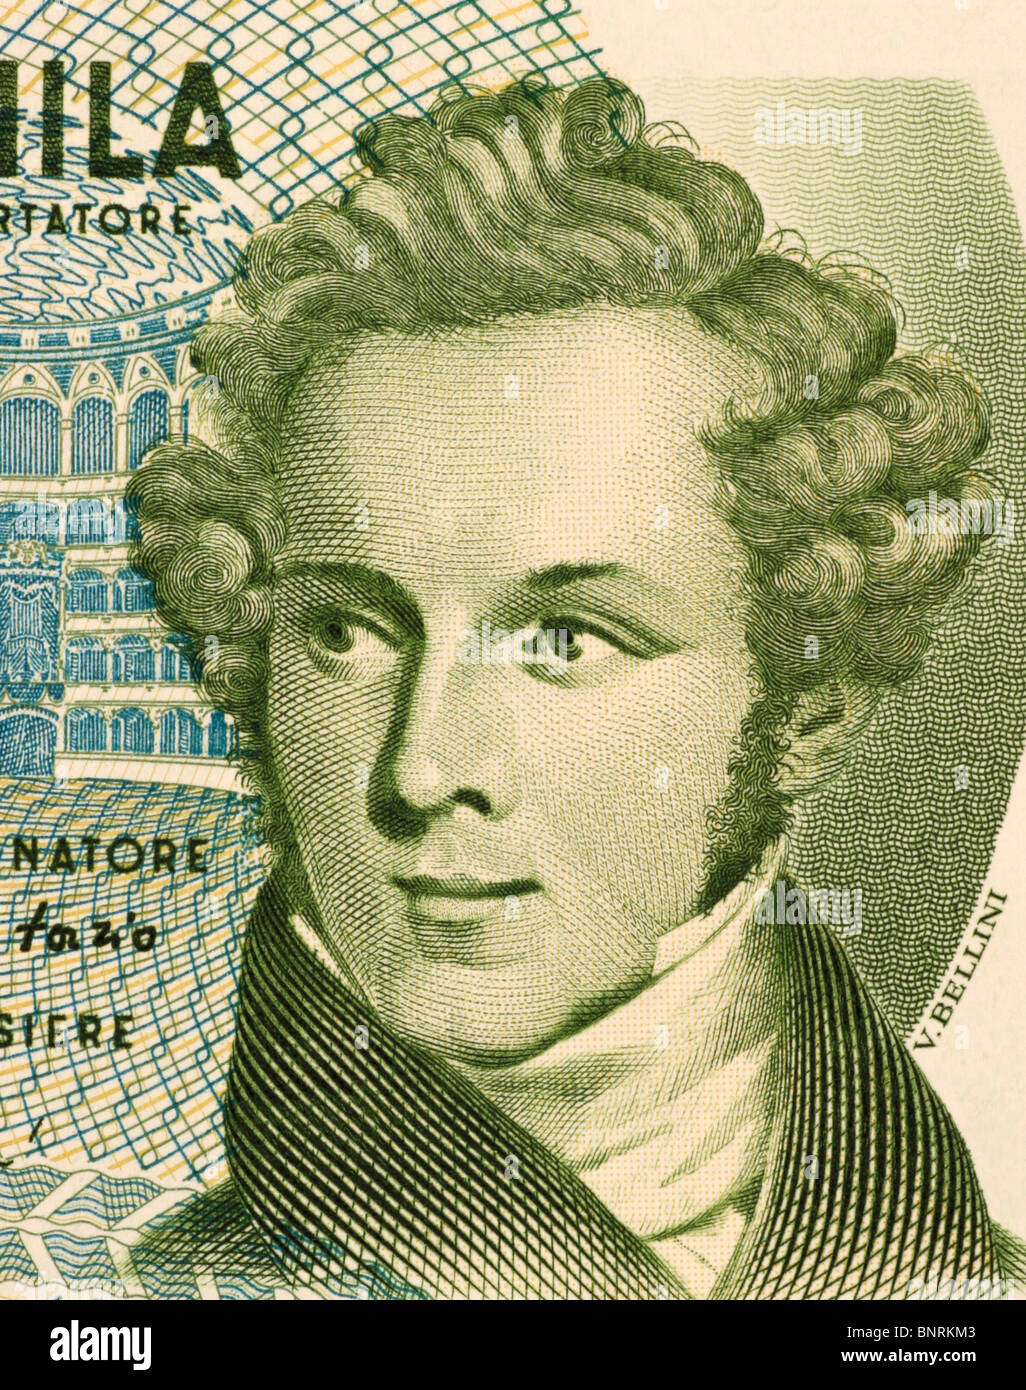 Vincenzo Bellini (1801-1835) on 5000 Lire 1985 Banknote from Italy. Italian opera composer. Stock Photo